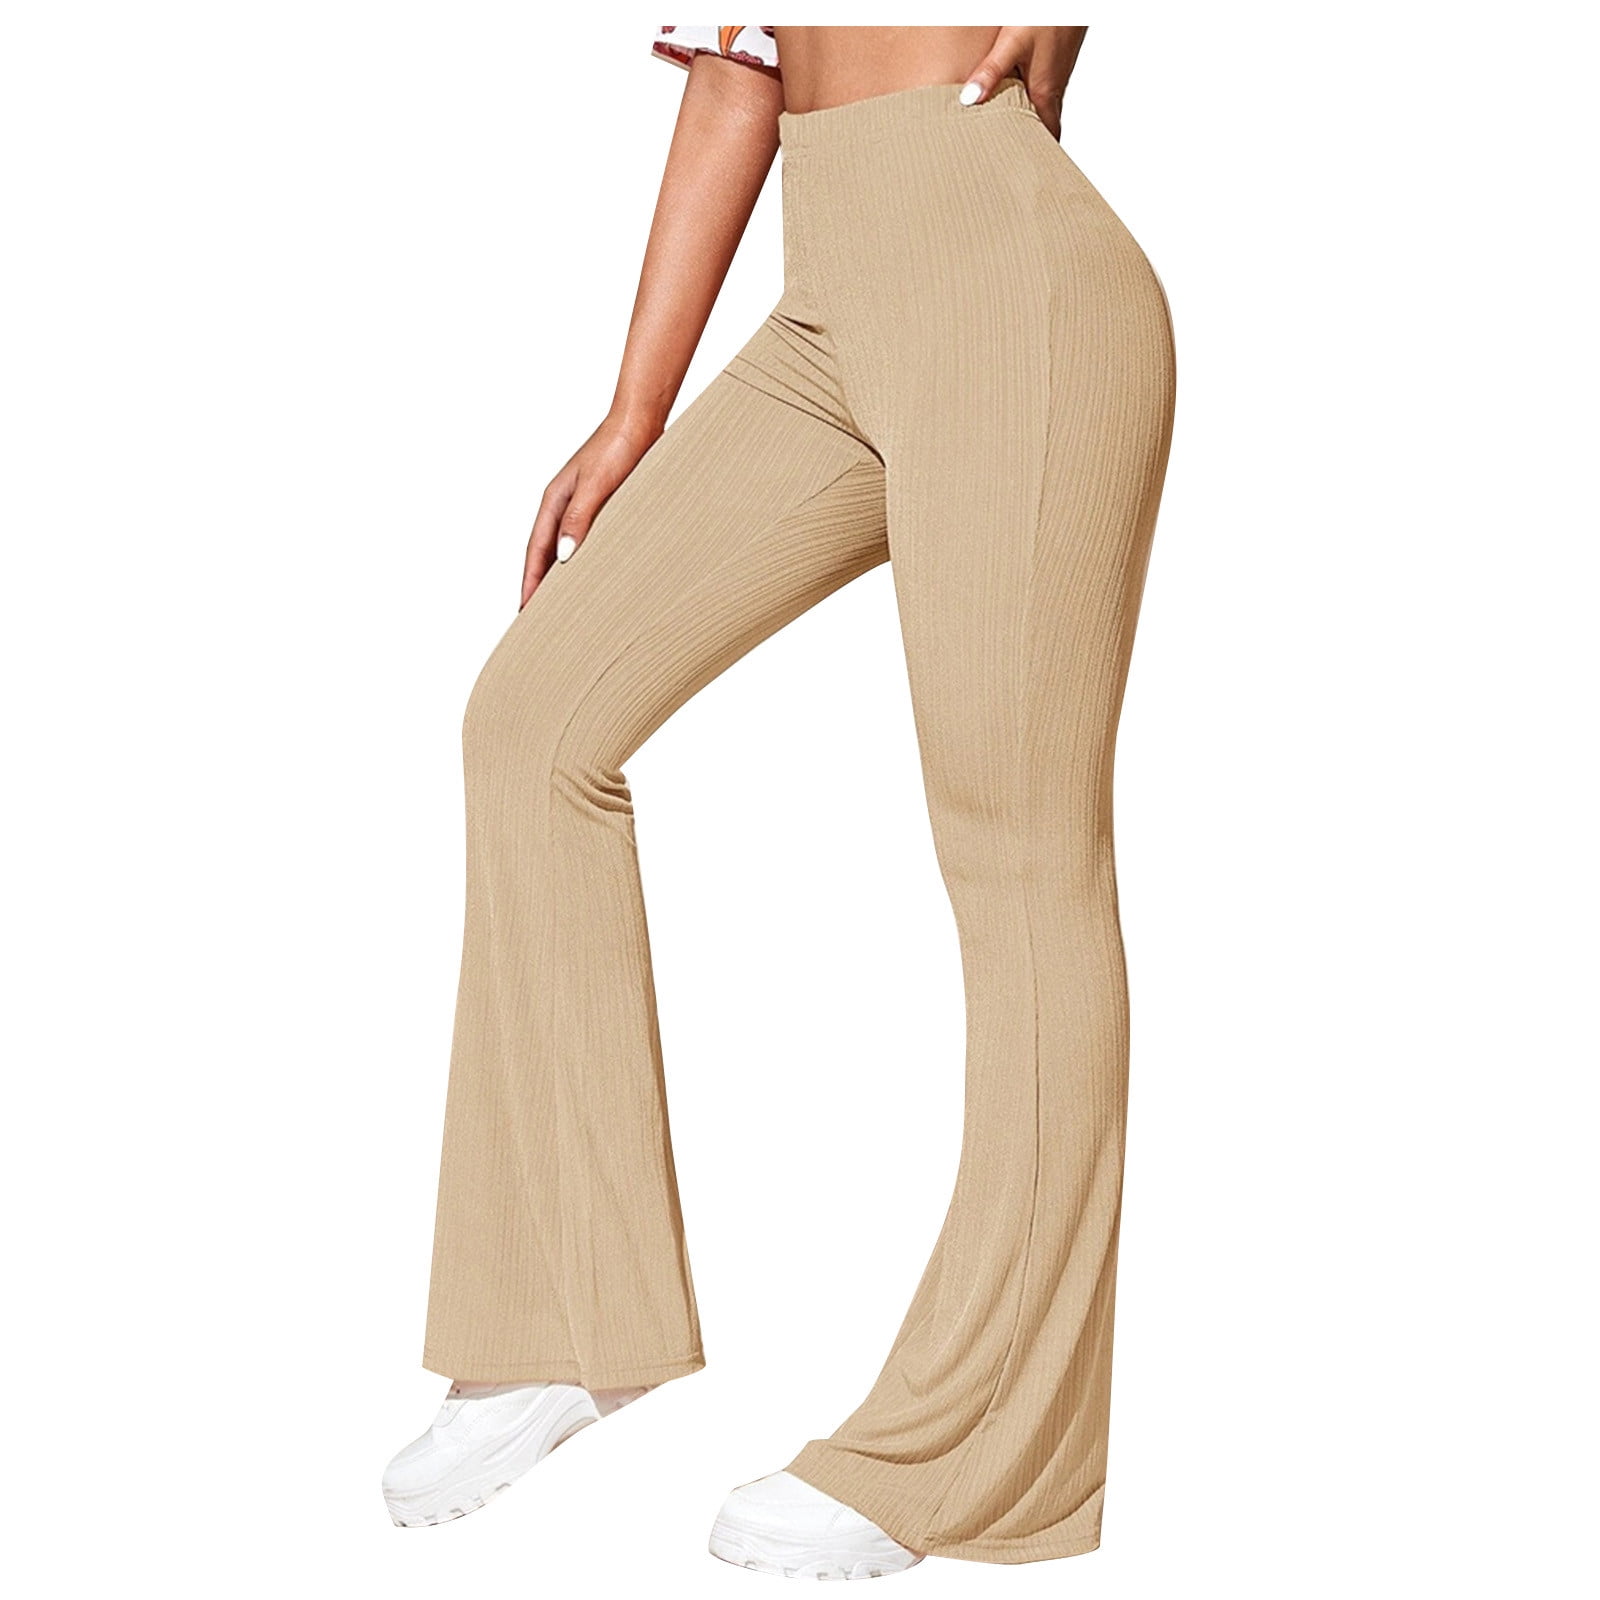  Women's Yoga Dress Pants 28/30/32/34 Stretchy Work Slacks  Business Casual Pants for Women Straight Leg Trousers Beige XS : Clothing,  Shoes & Jewelry